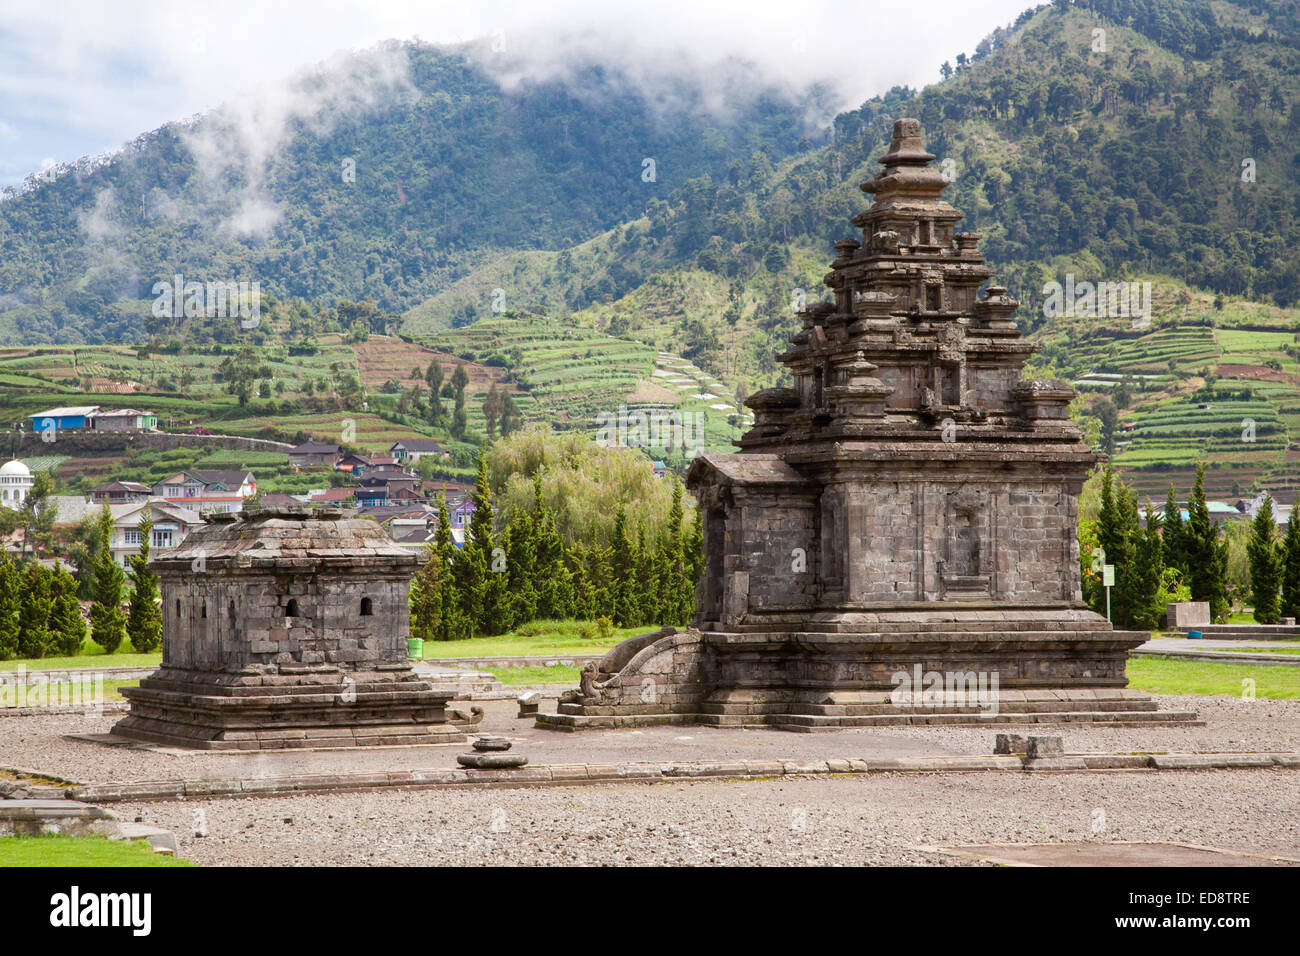 Dieng temple Arjuna  complex plateau National Park Wonosobo Central Java Indonesia. Stock Photo